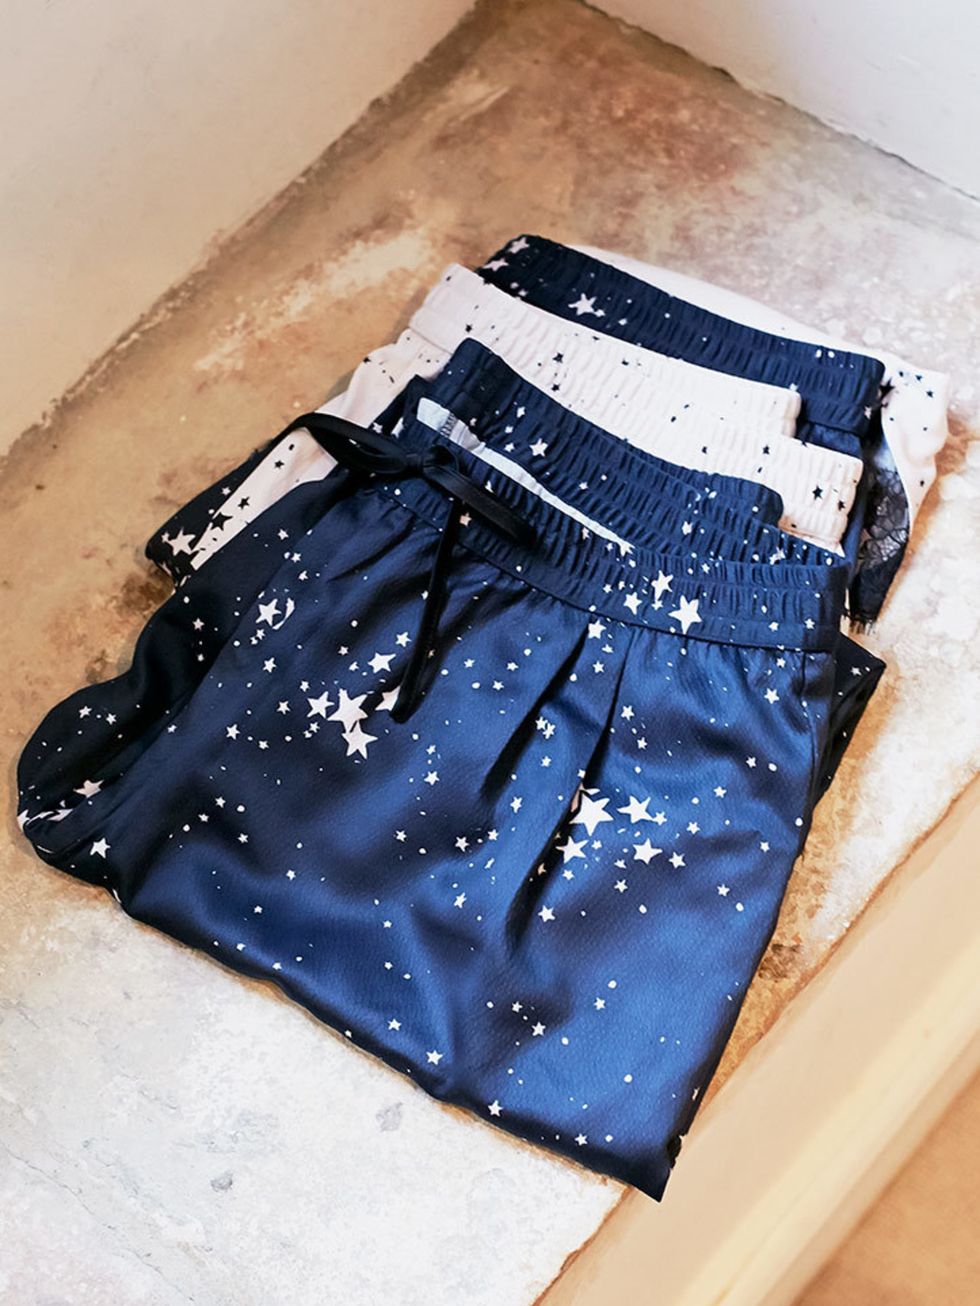 "Stars are one of my motifs. The star-print came [not pictured] is my favourite piece from my lingerie range. It goes with both sexy shorts or pyjama trousers."